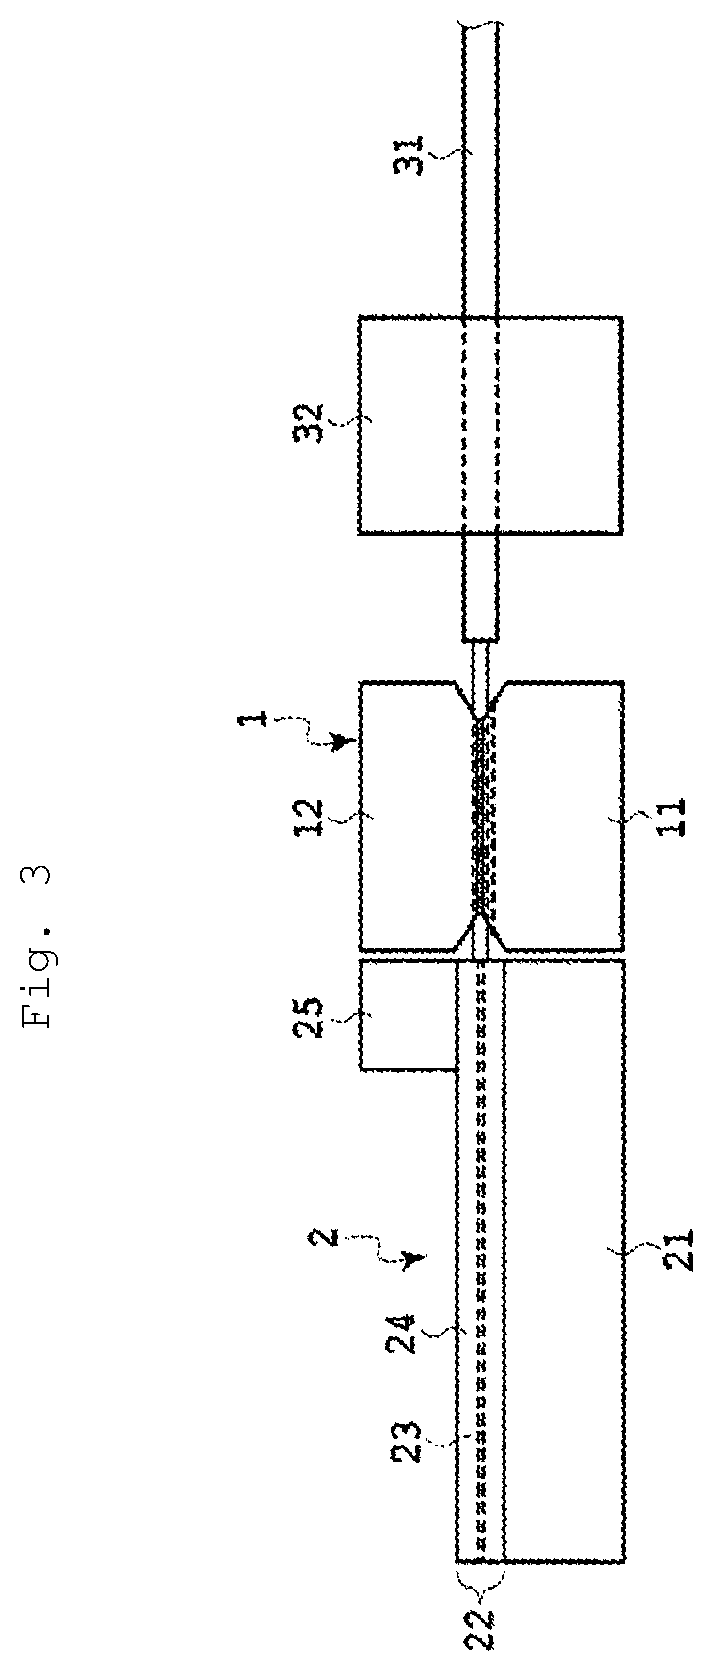 Optical Circuit and Optical Connection Structure